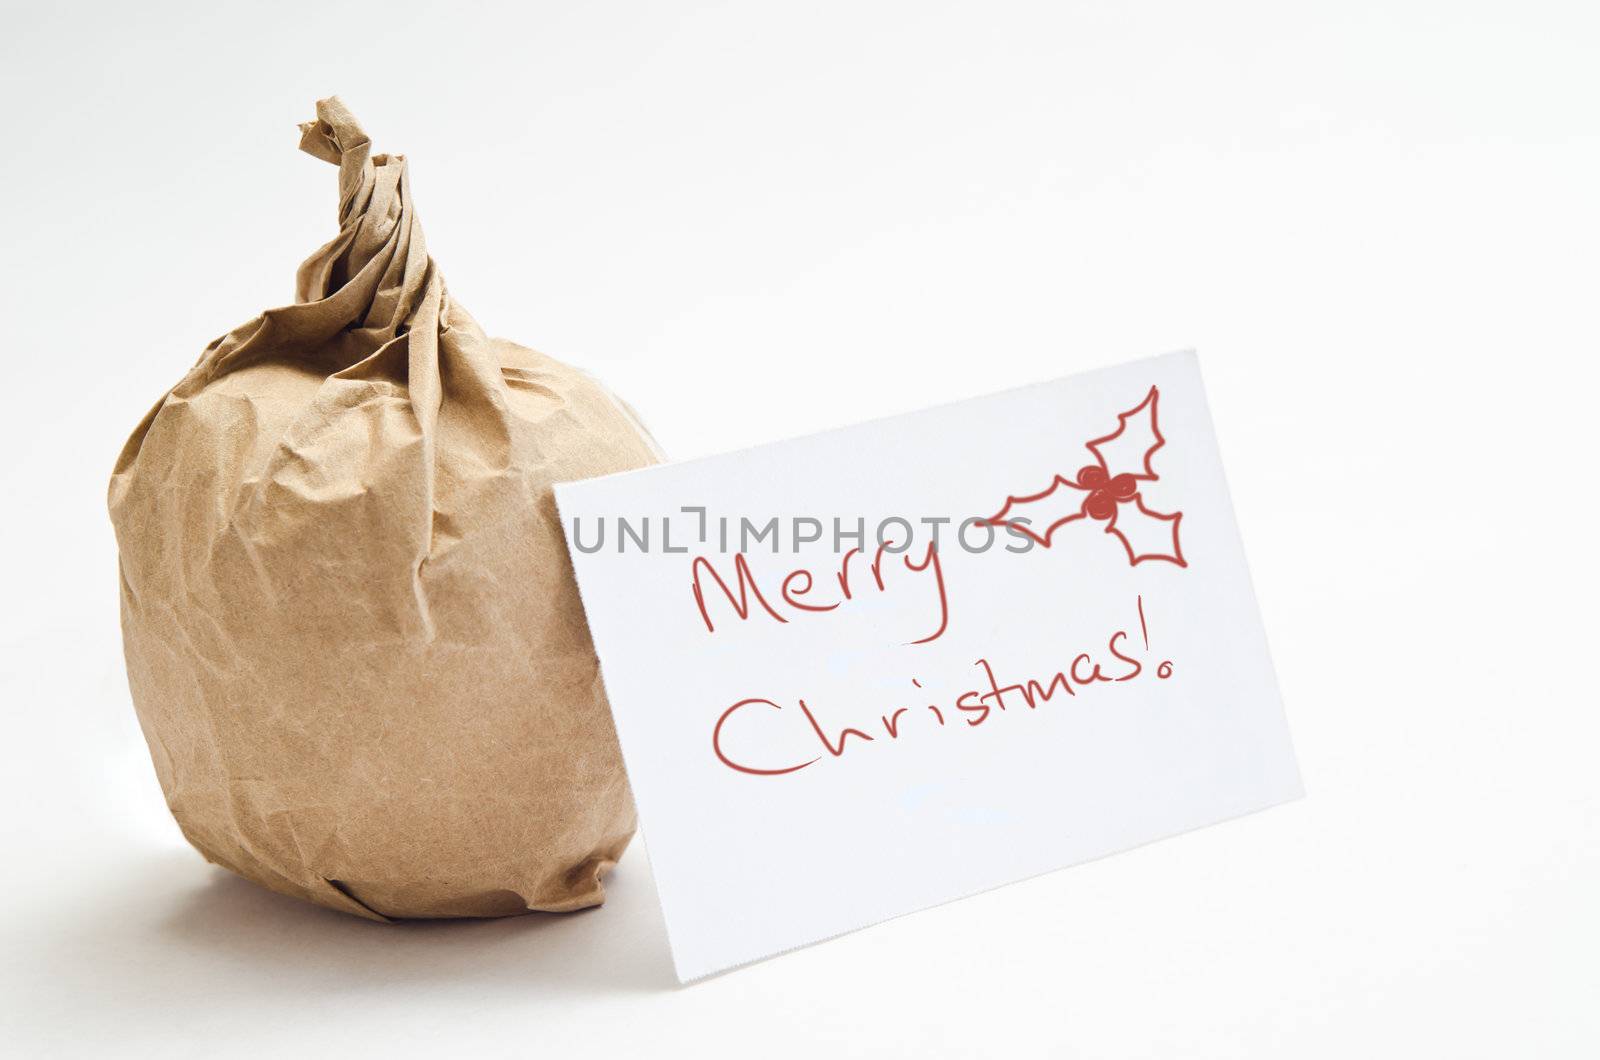 Conceptual image to convey a frugal Christmas.  An apple wrapped in brown paper with a gift card.